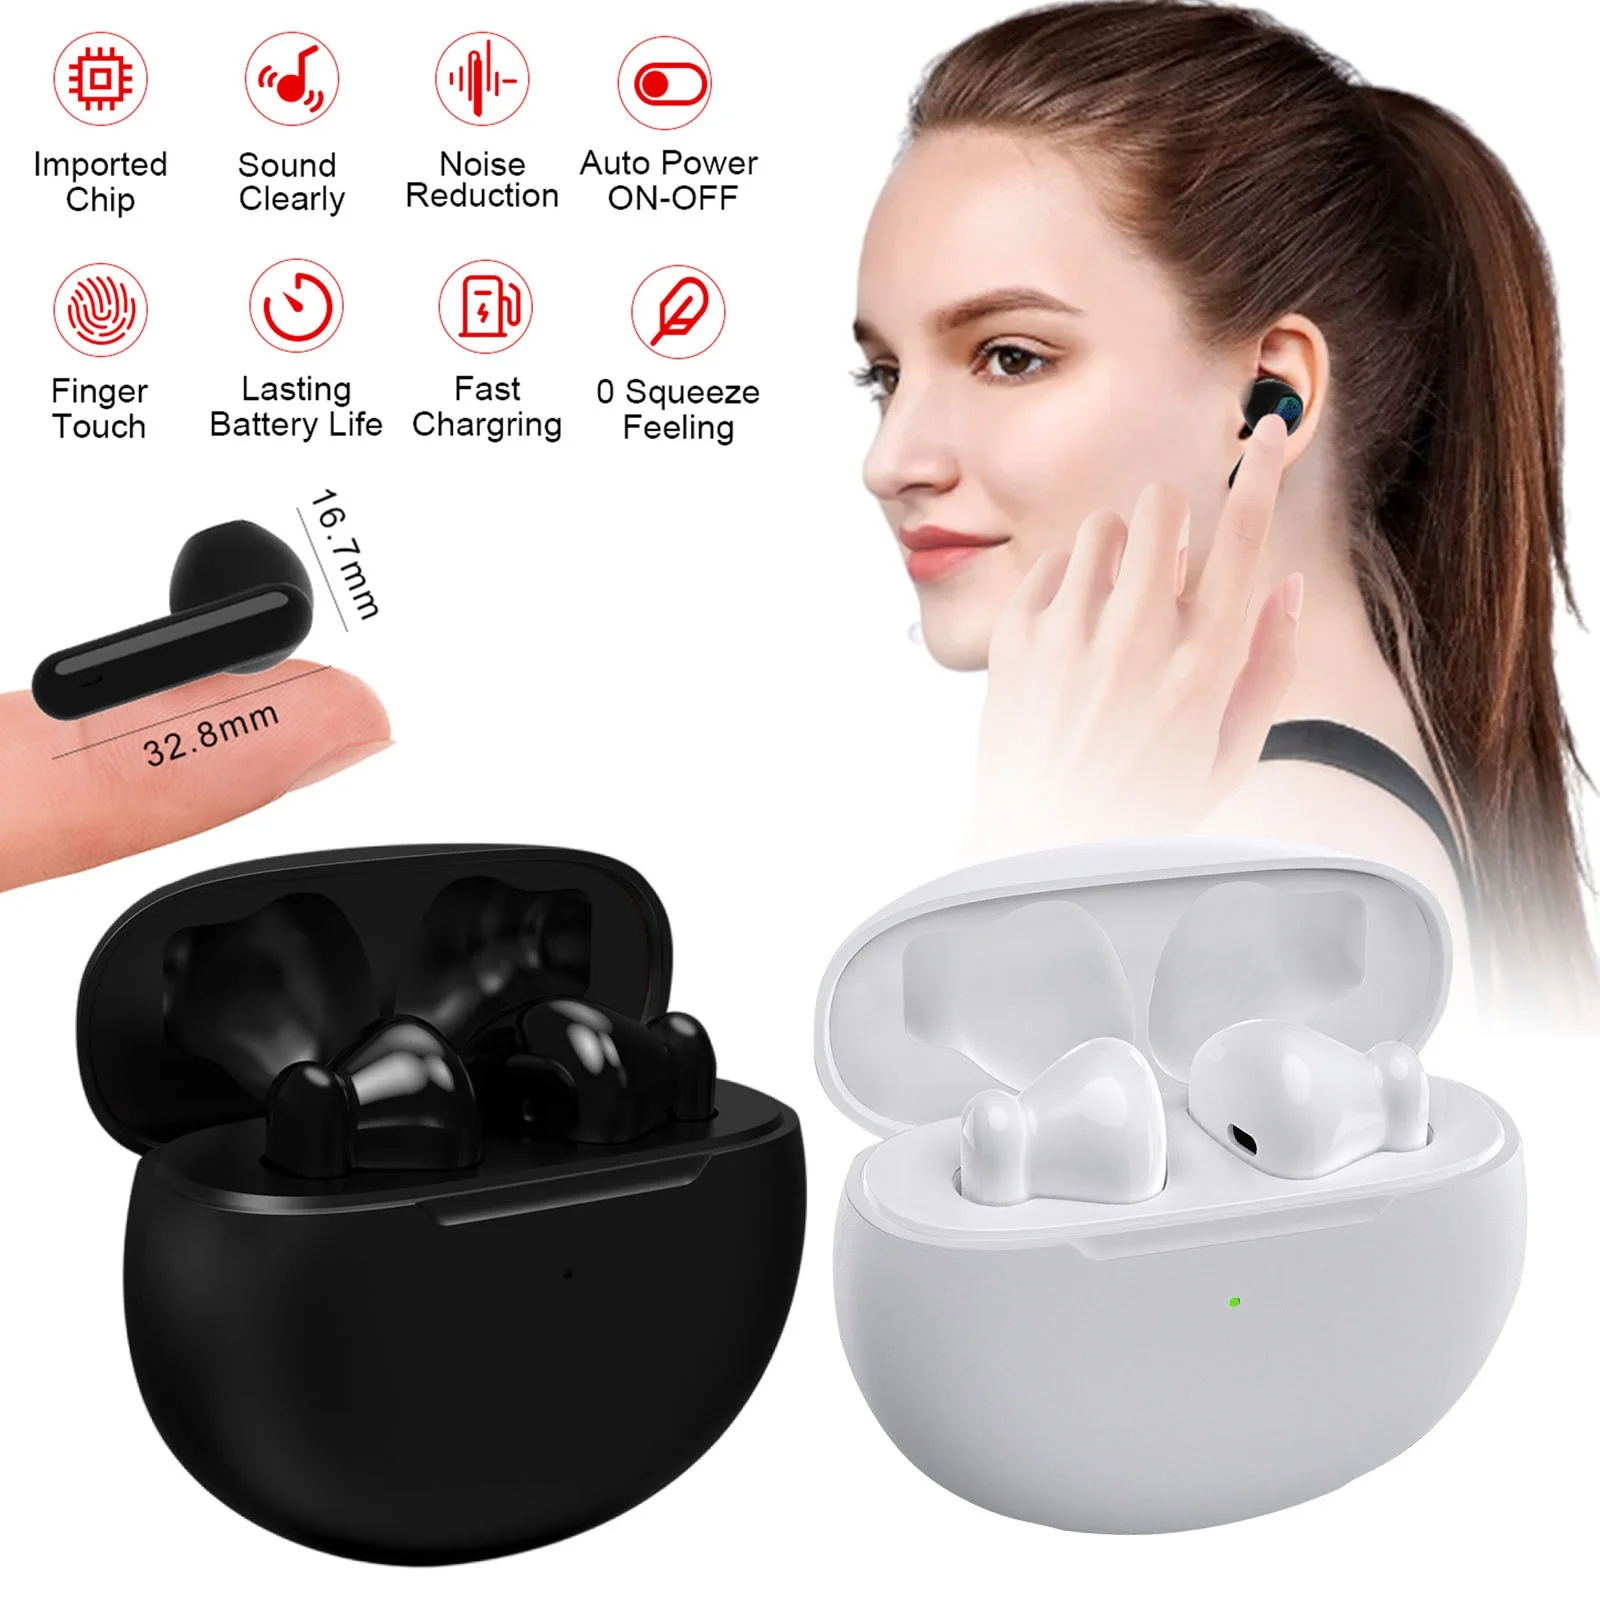 New Style Hearing Aid No Noise Mini Hearing Aid for Elderly Deafness Audio Amplifier Sound Deaf Hear Loss Digital Hearing Aids